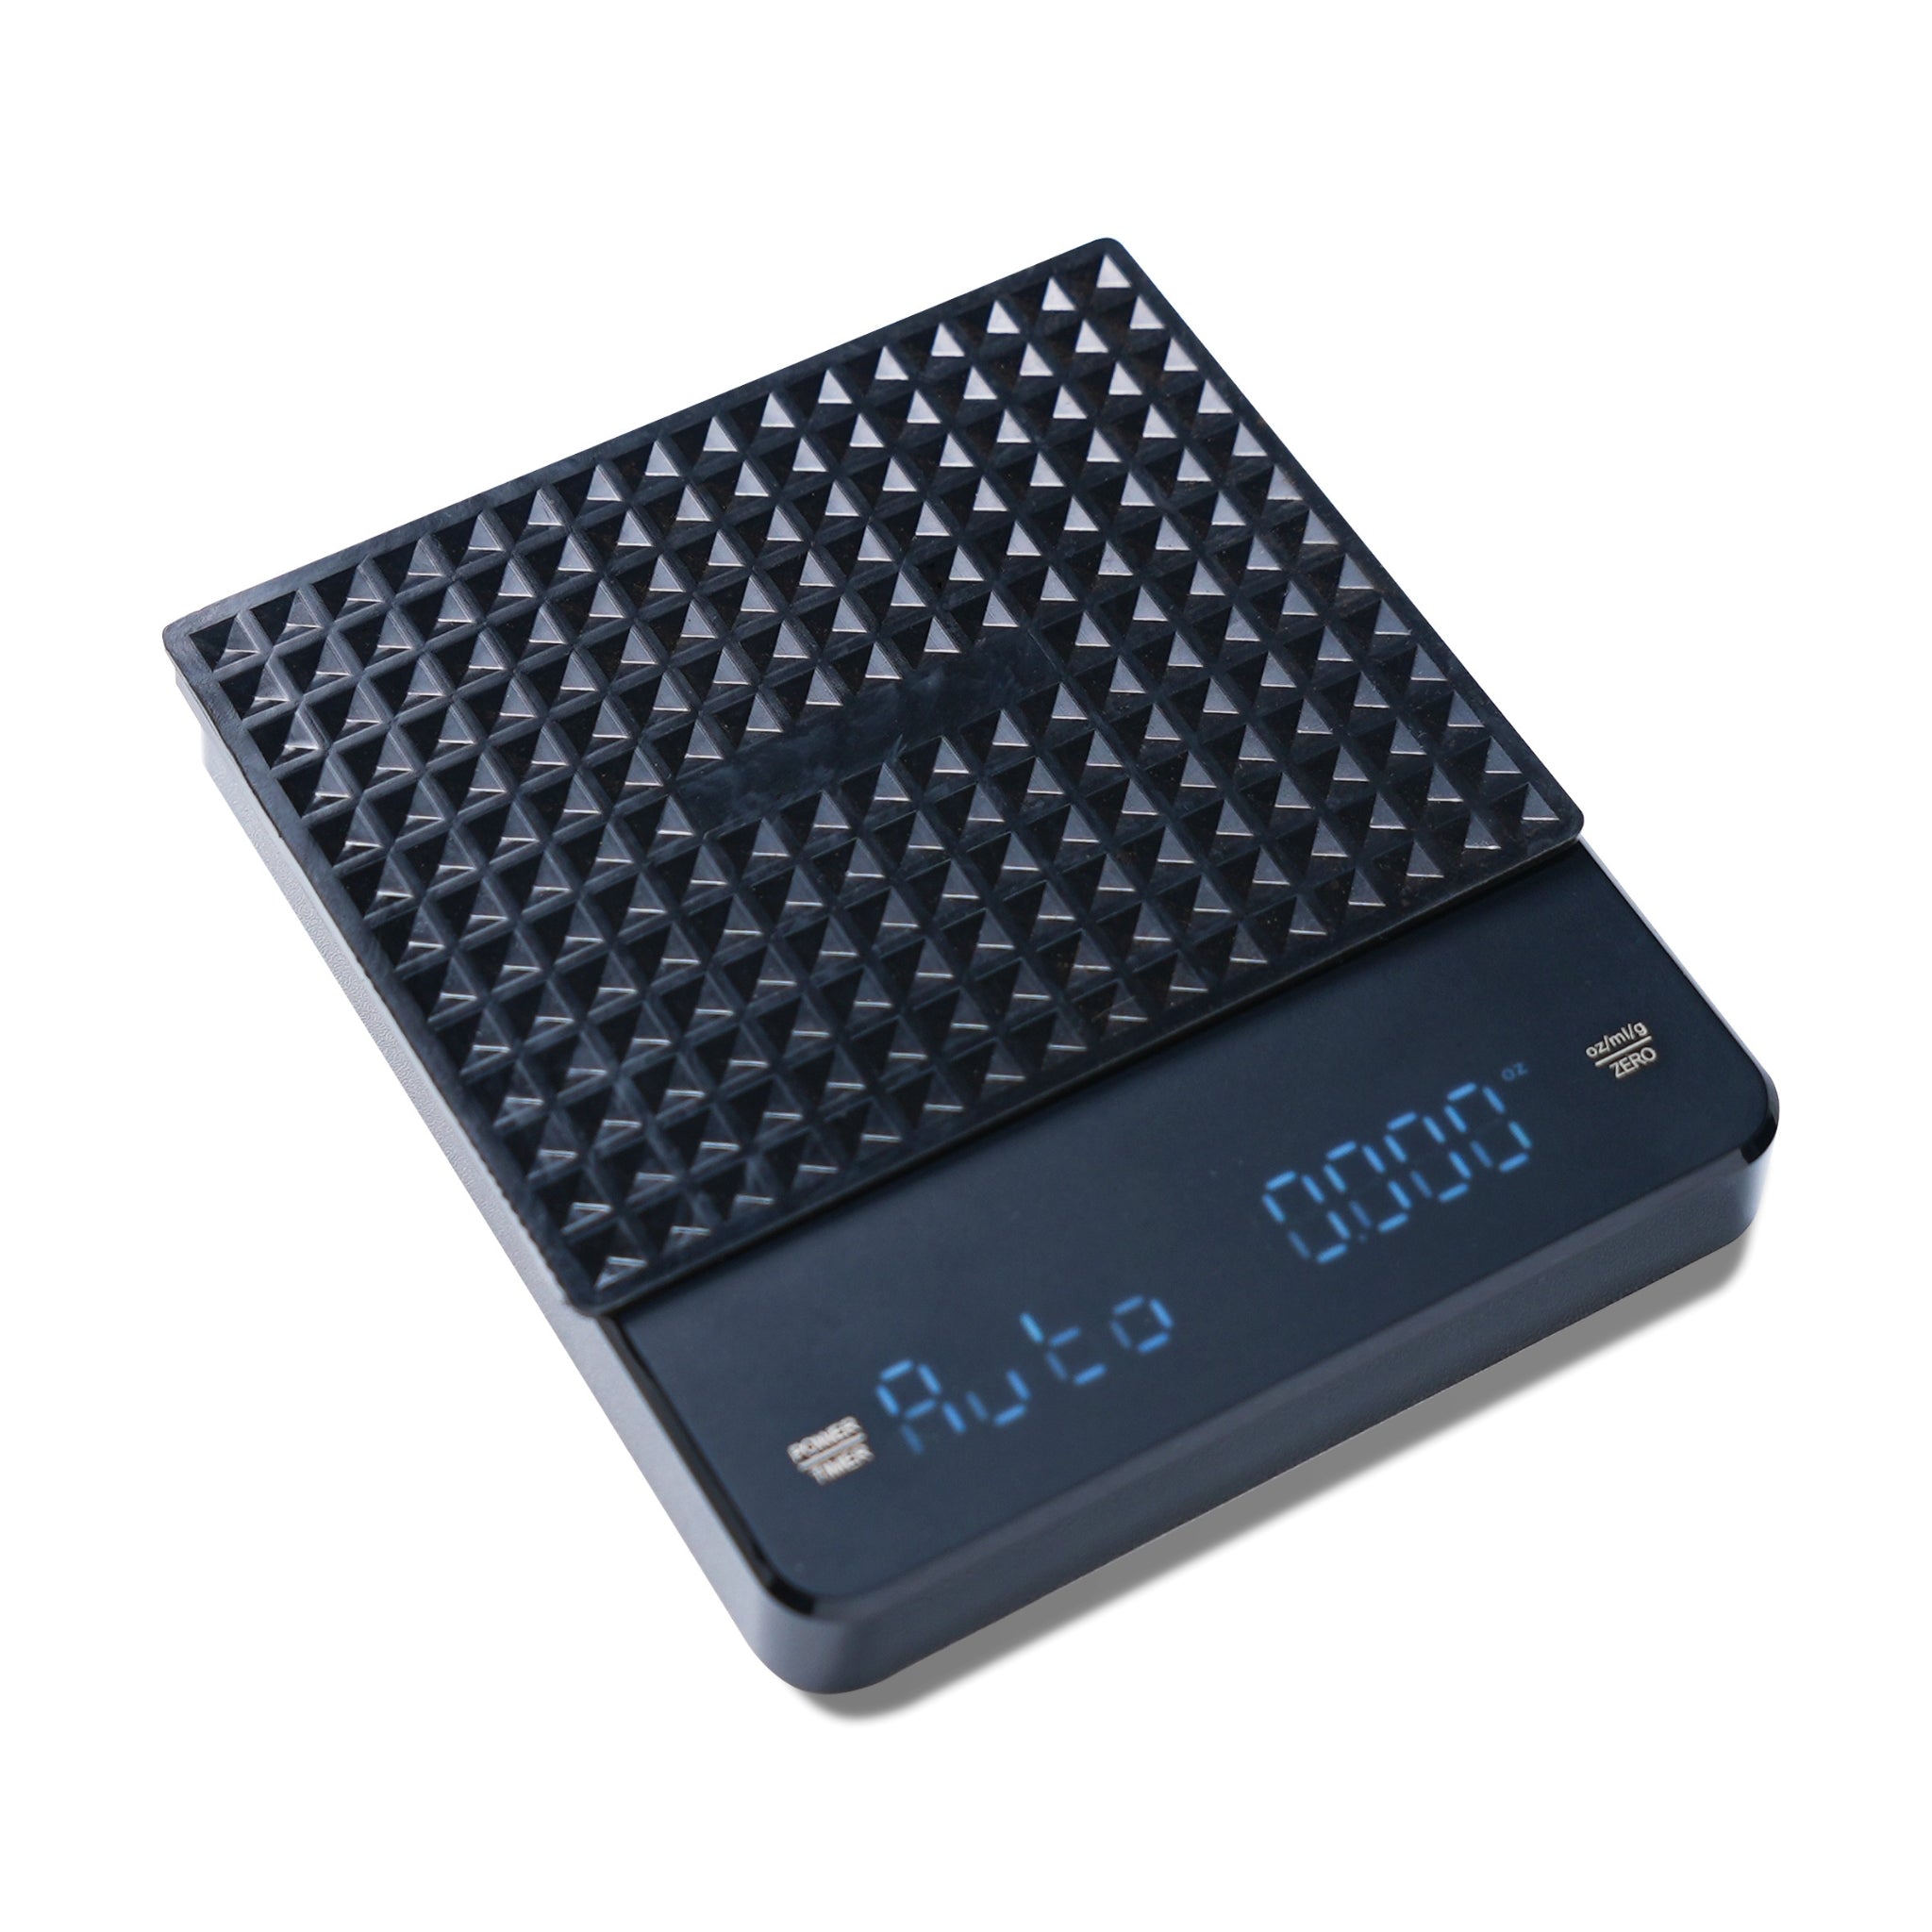 Aligain Coffee Weighing Scale